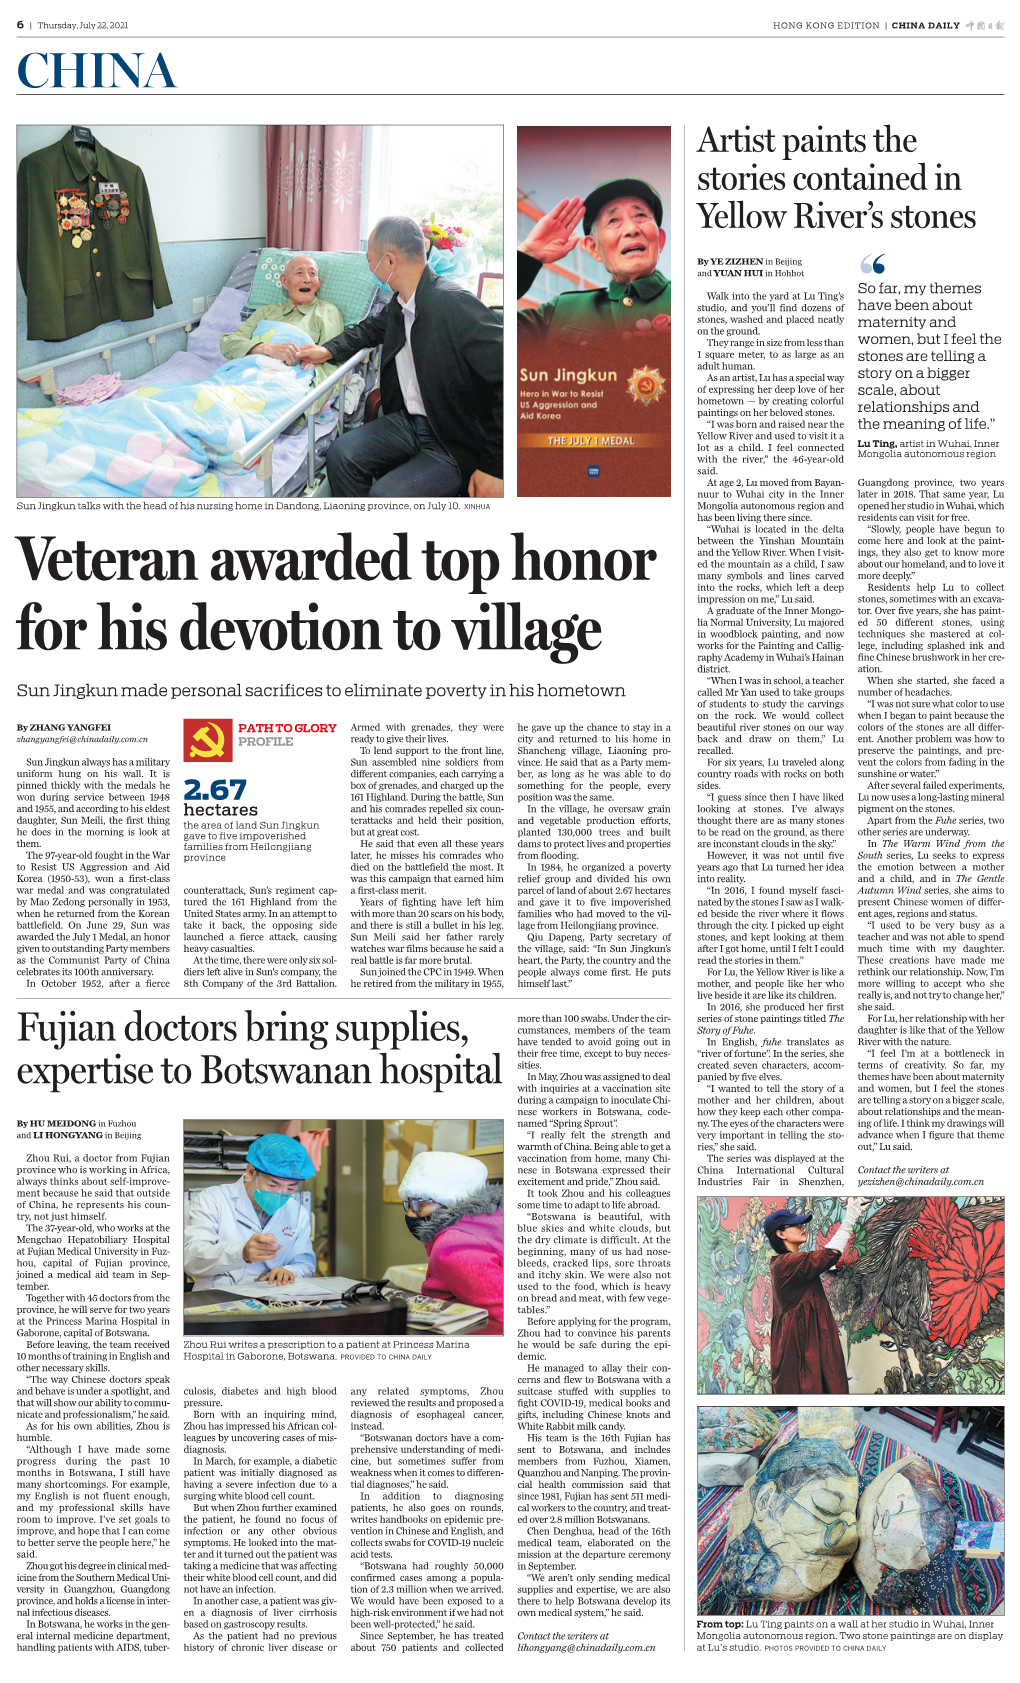 Veteran Awarded Top Honor for His Devotion to Village